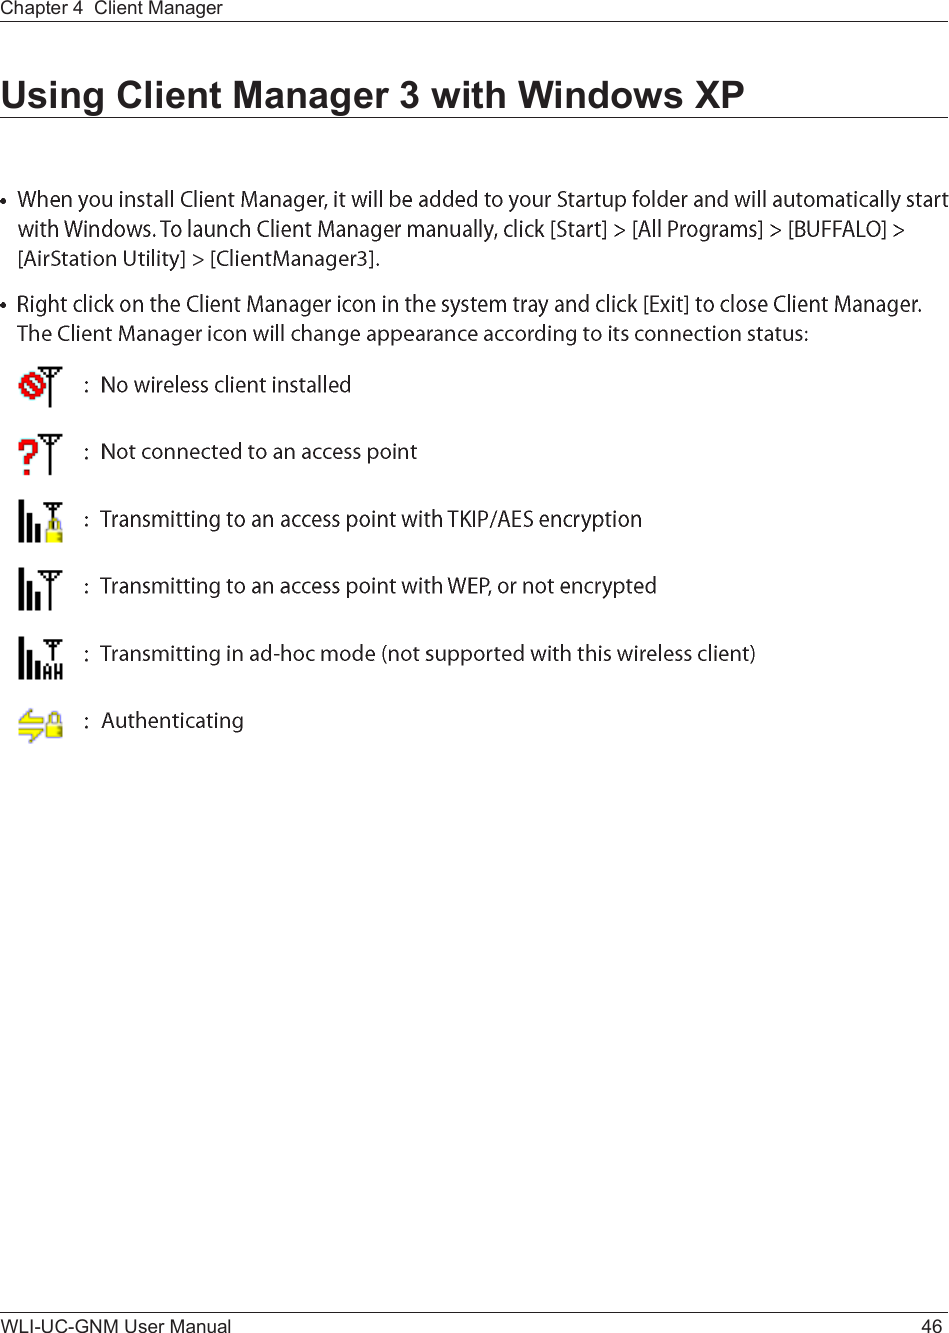 WLI-UC-GNM User Manual 46Chapter 4  Client ManagerUsing Client Manager 3 with Windows XP